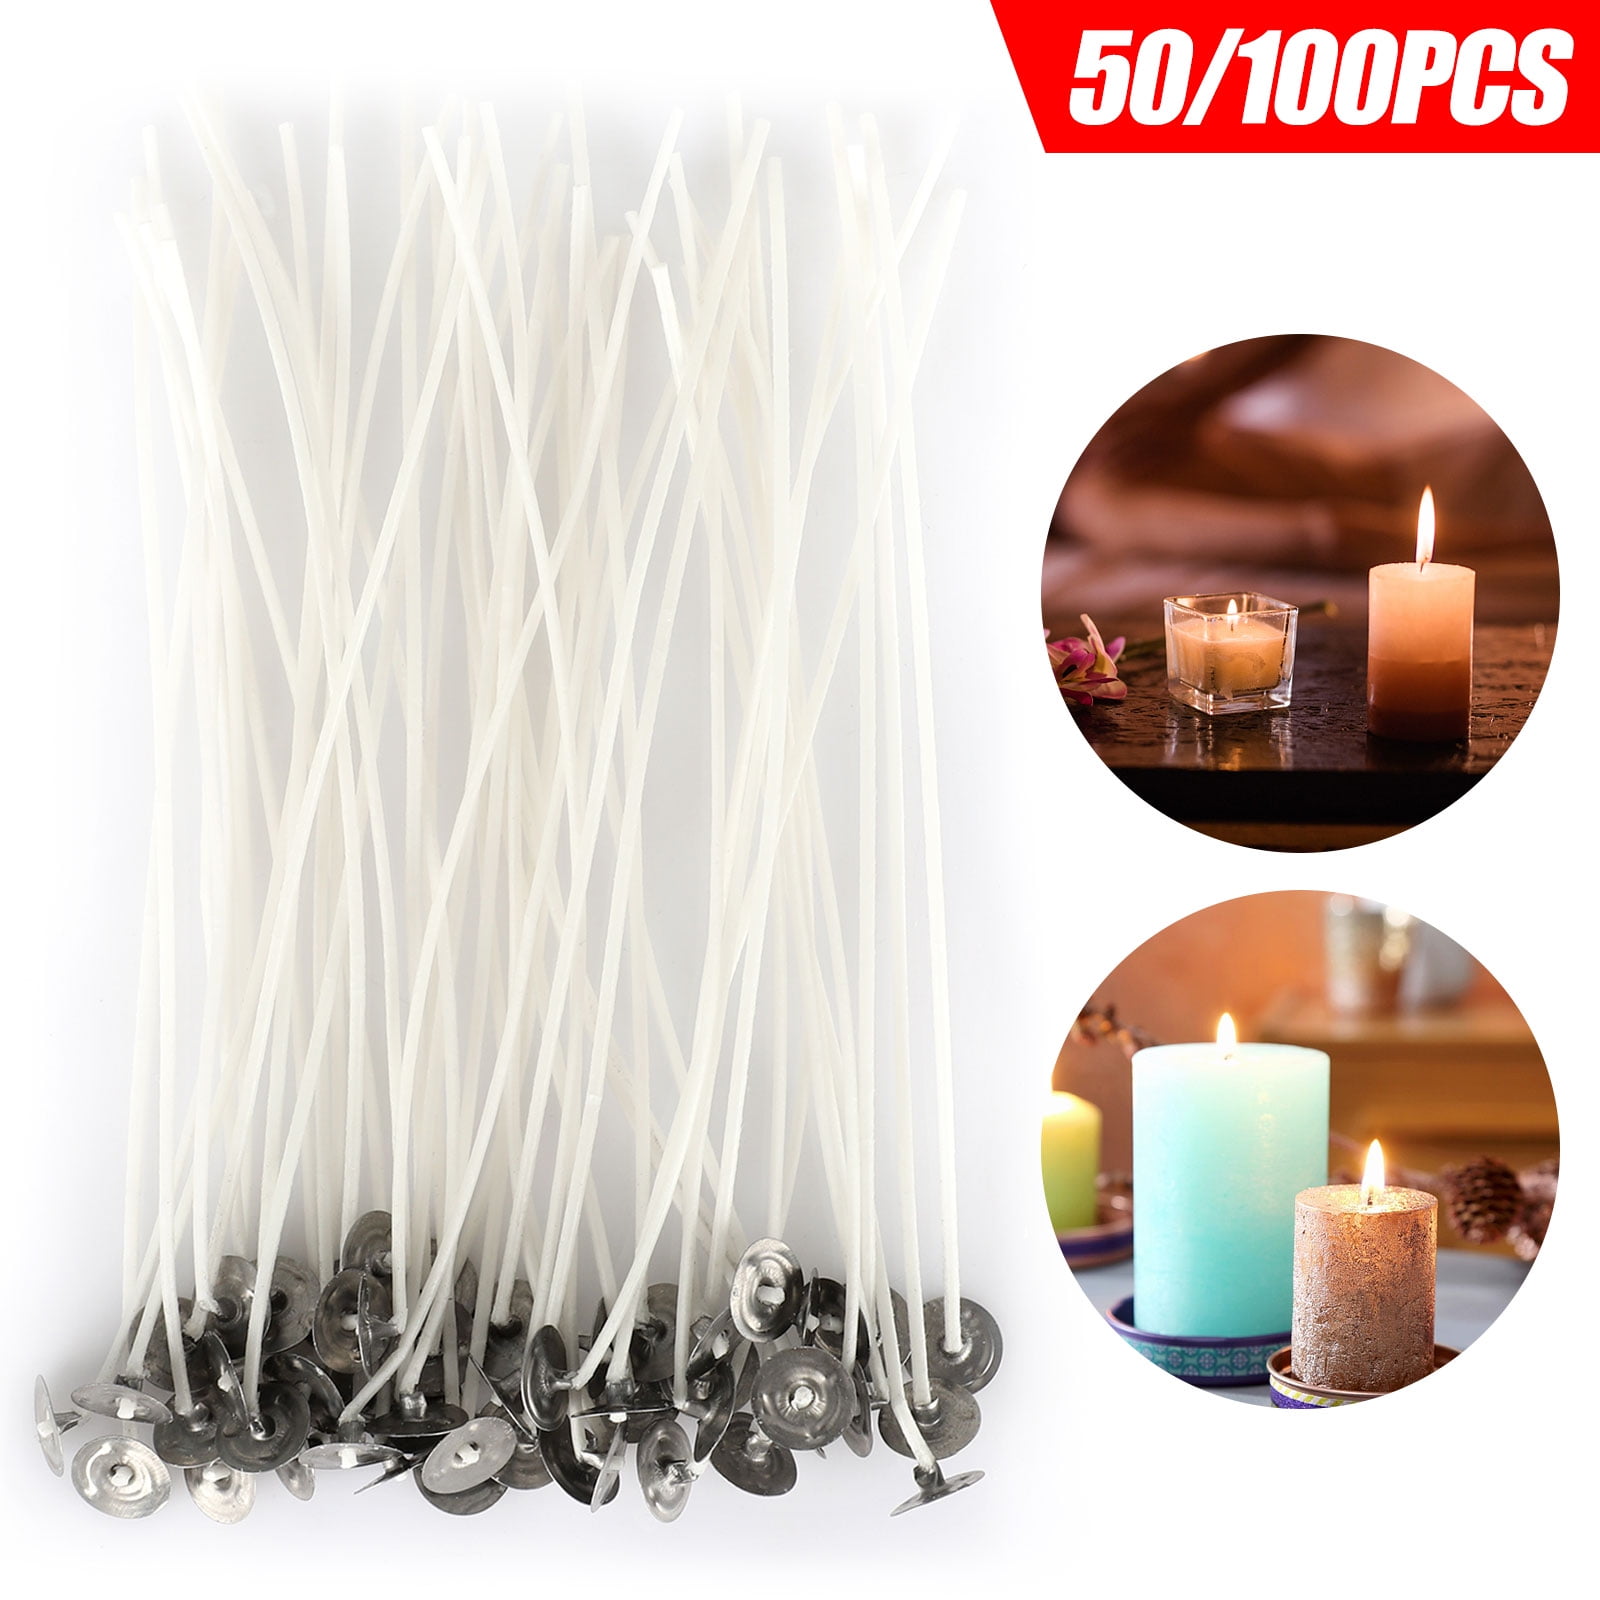 3 cm Pre Waxed Candle Wicks with Sustainers Long Tabbed for Candle Making DIY Crafts 10 pieces of 30 mm